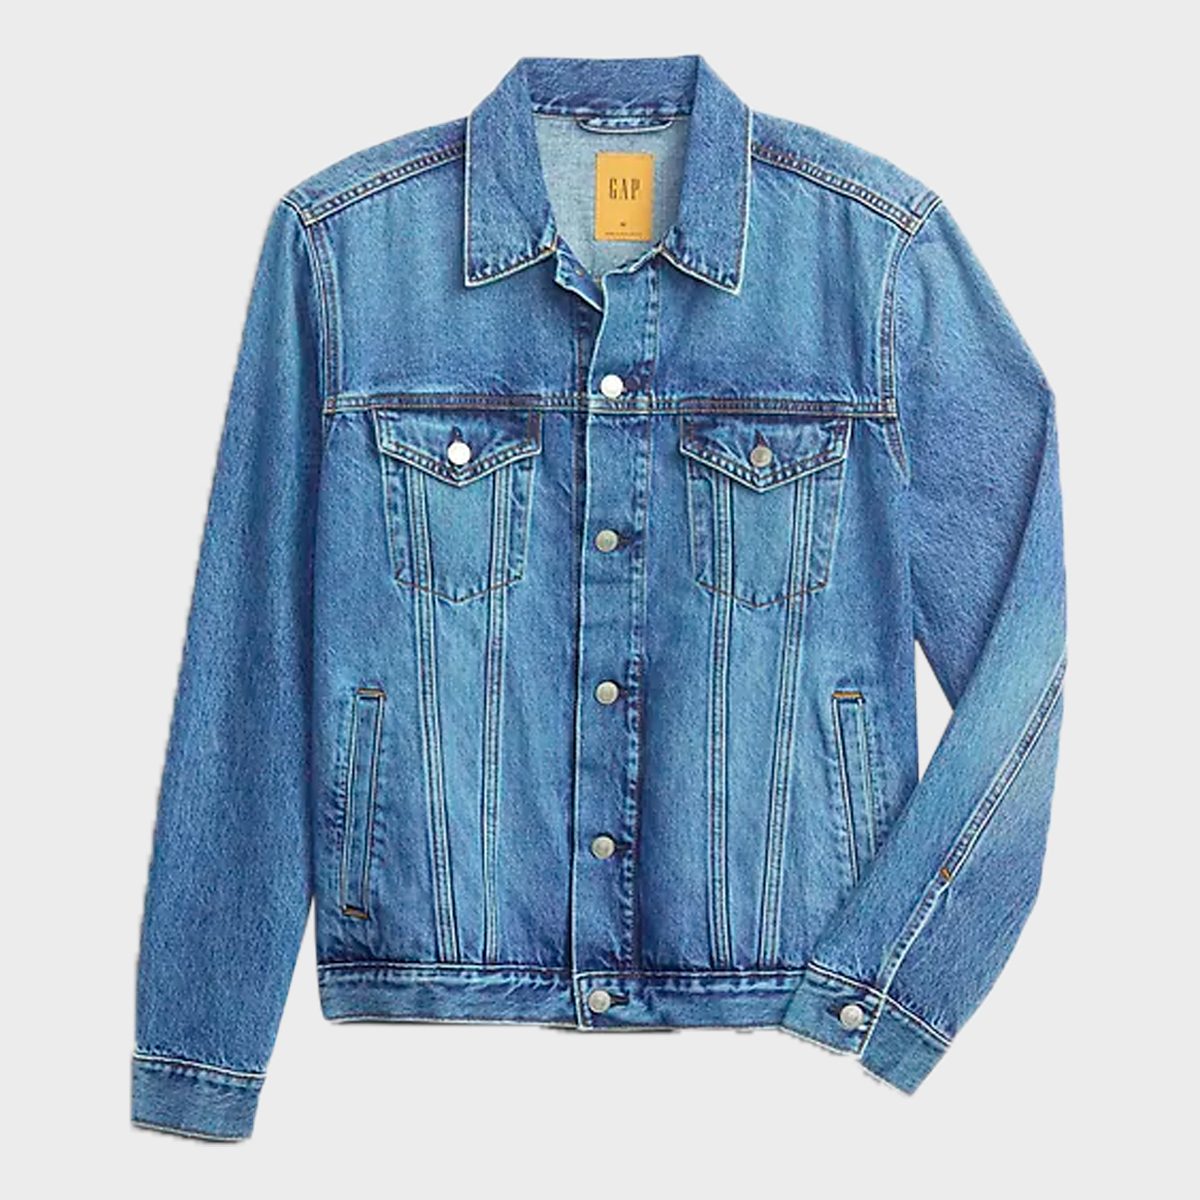 Daily Paper Unisex Jacket Blue - Mens - Denim Jackets Daily Paper